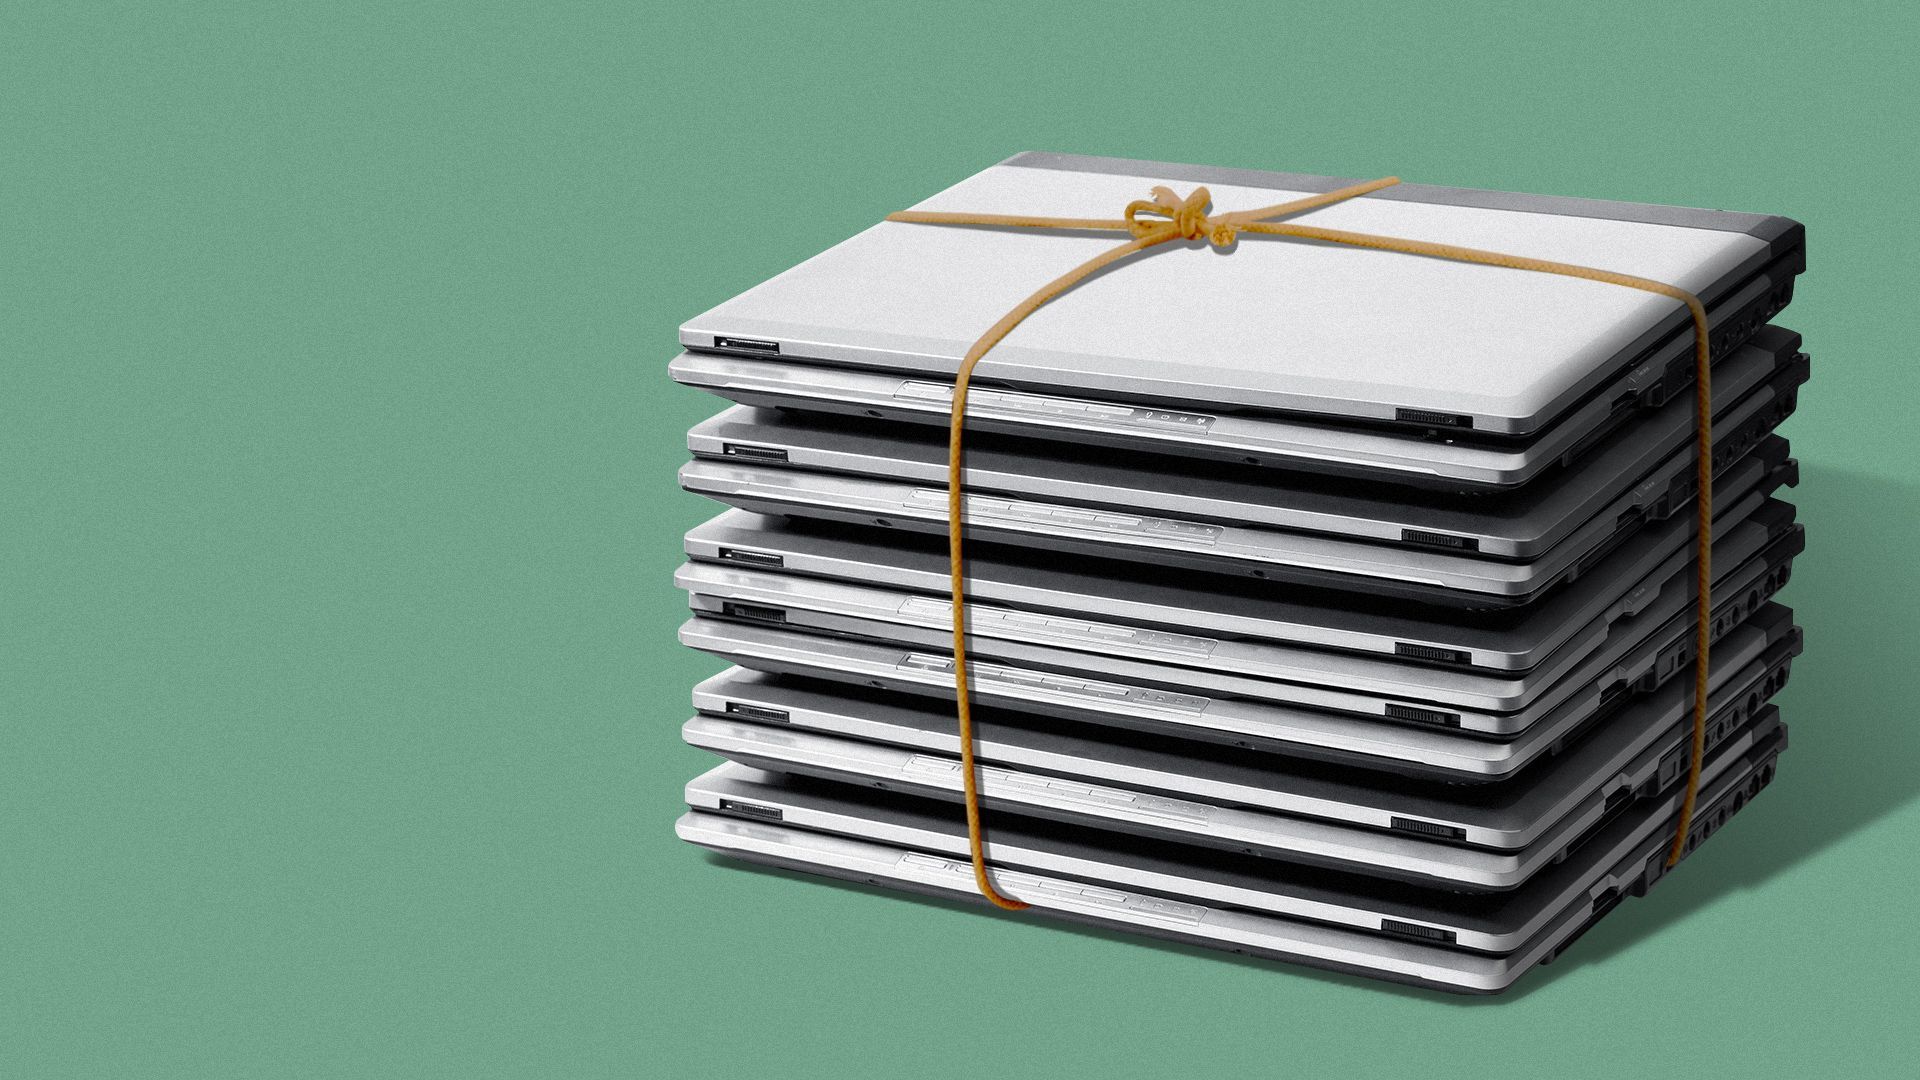 Illustration of a stack of laptops tied together with twine mimicking a stack of newspapers. 